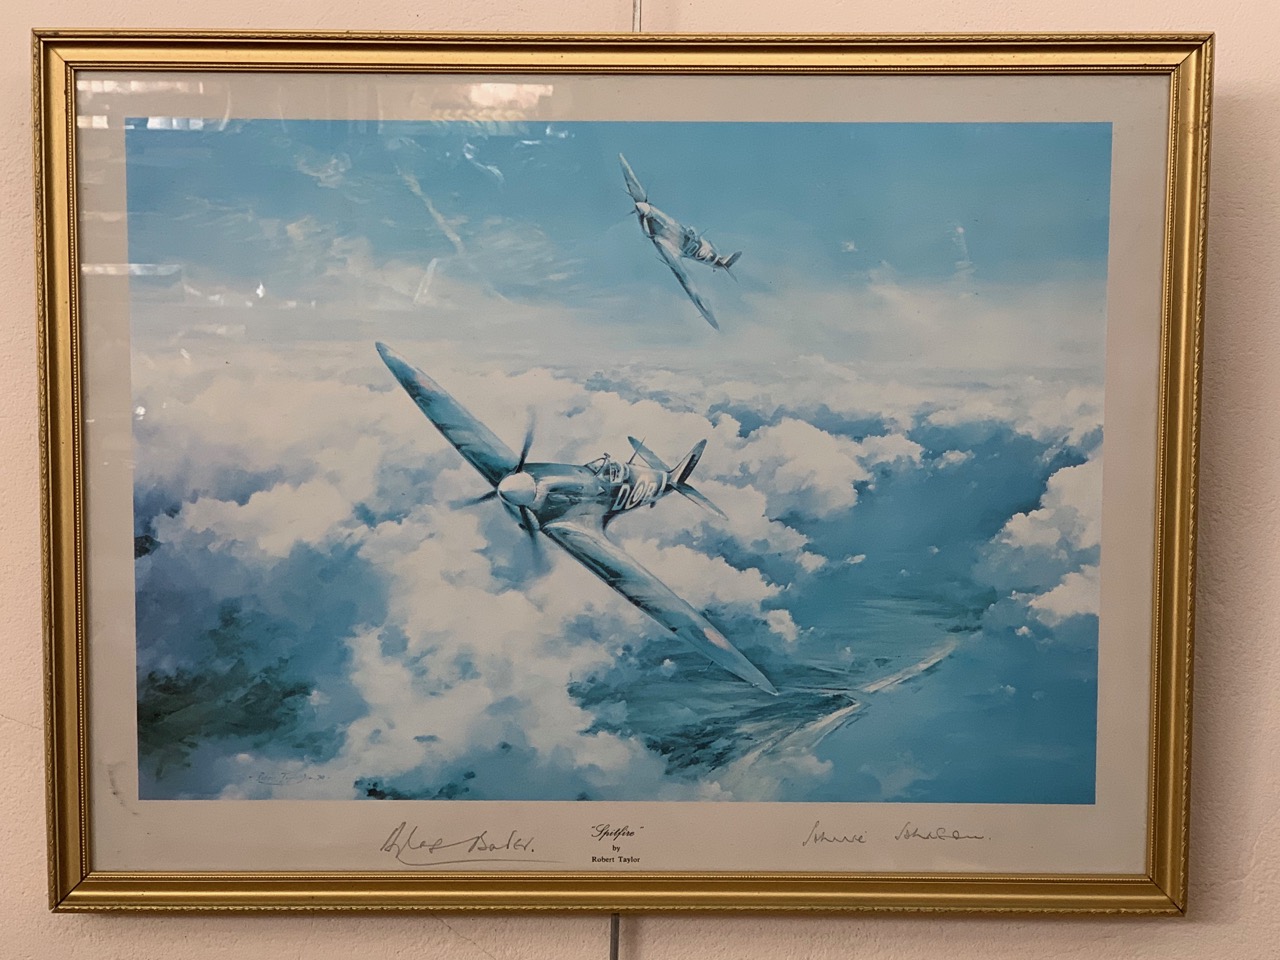 Robert Taylor, "Spitfire", studies of two RAF Spitfires in flight, signed to the lower margin by the